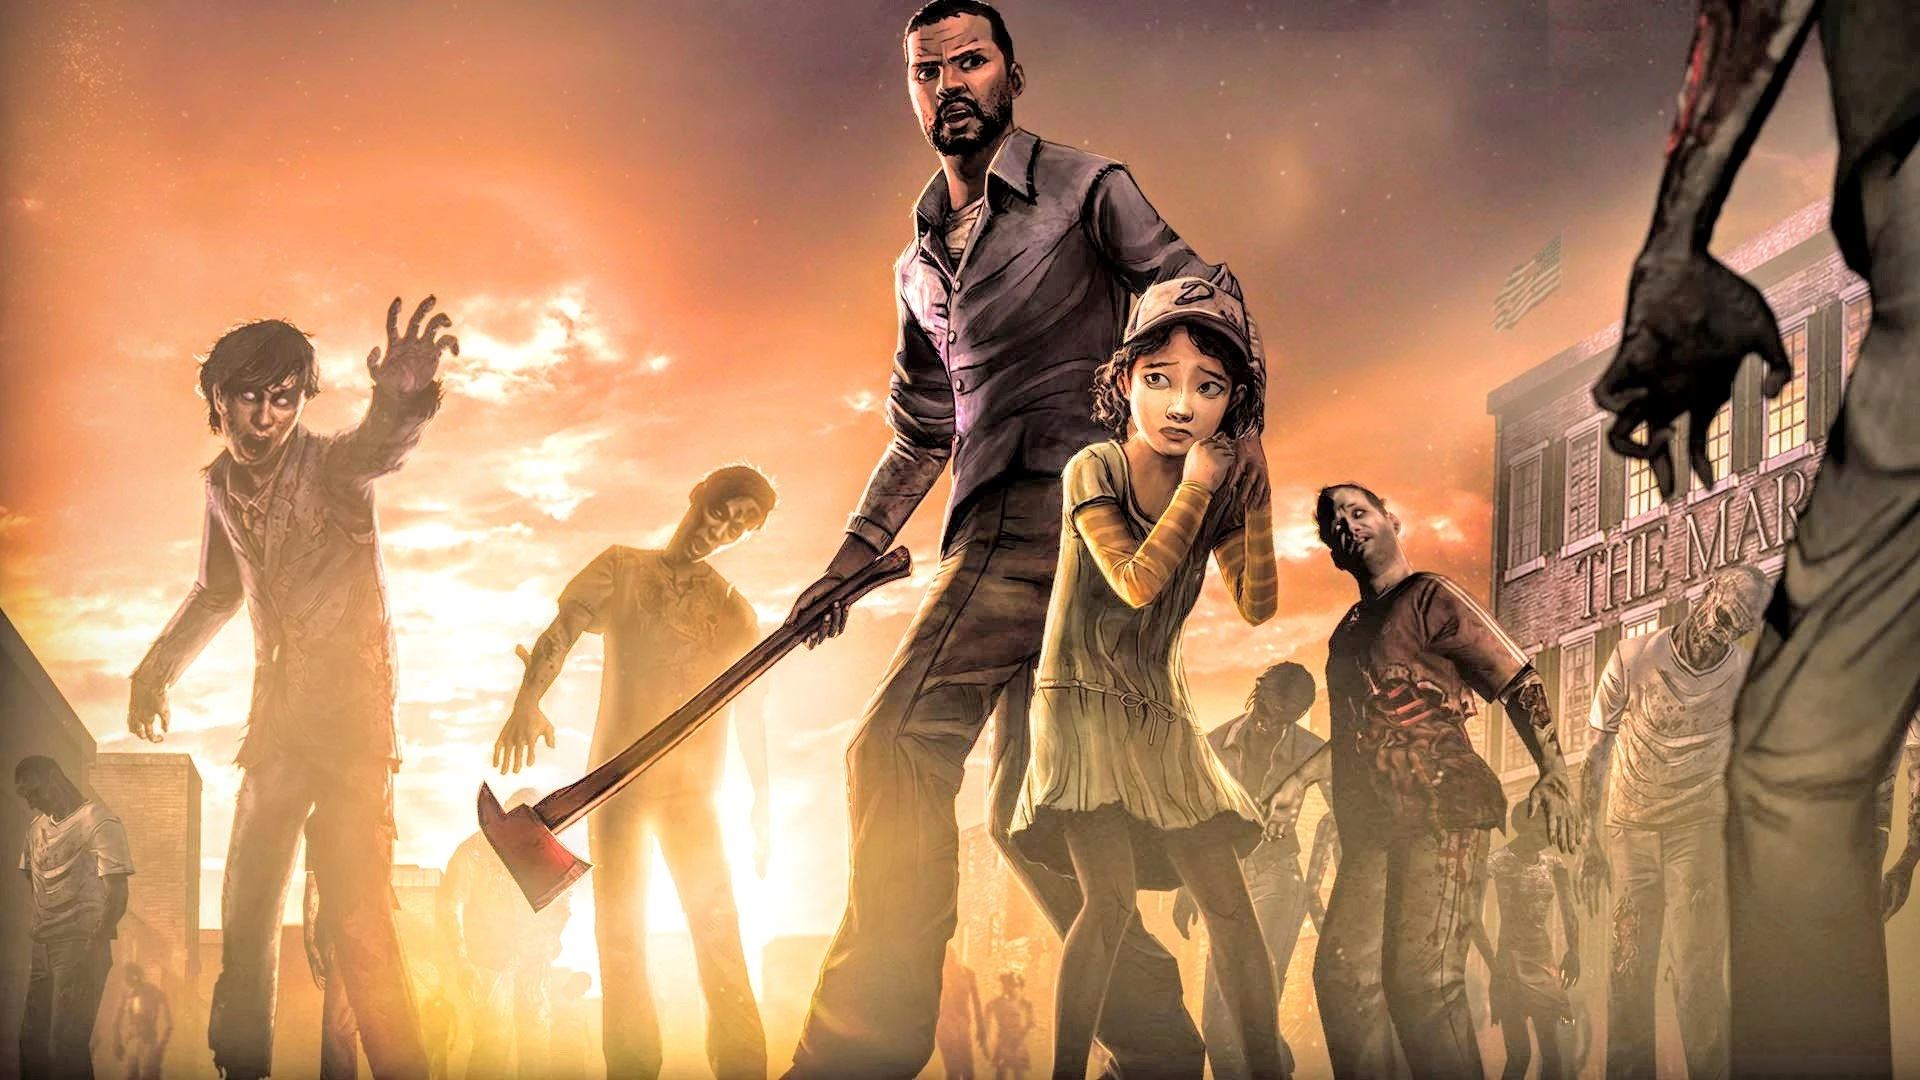 The Walking Dead telltale skybound is making The Invincible by Robert Kirkman